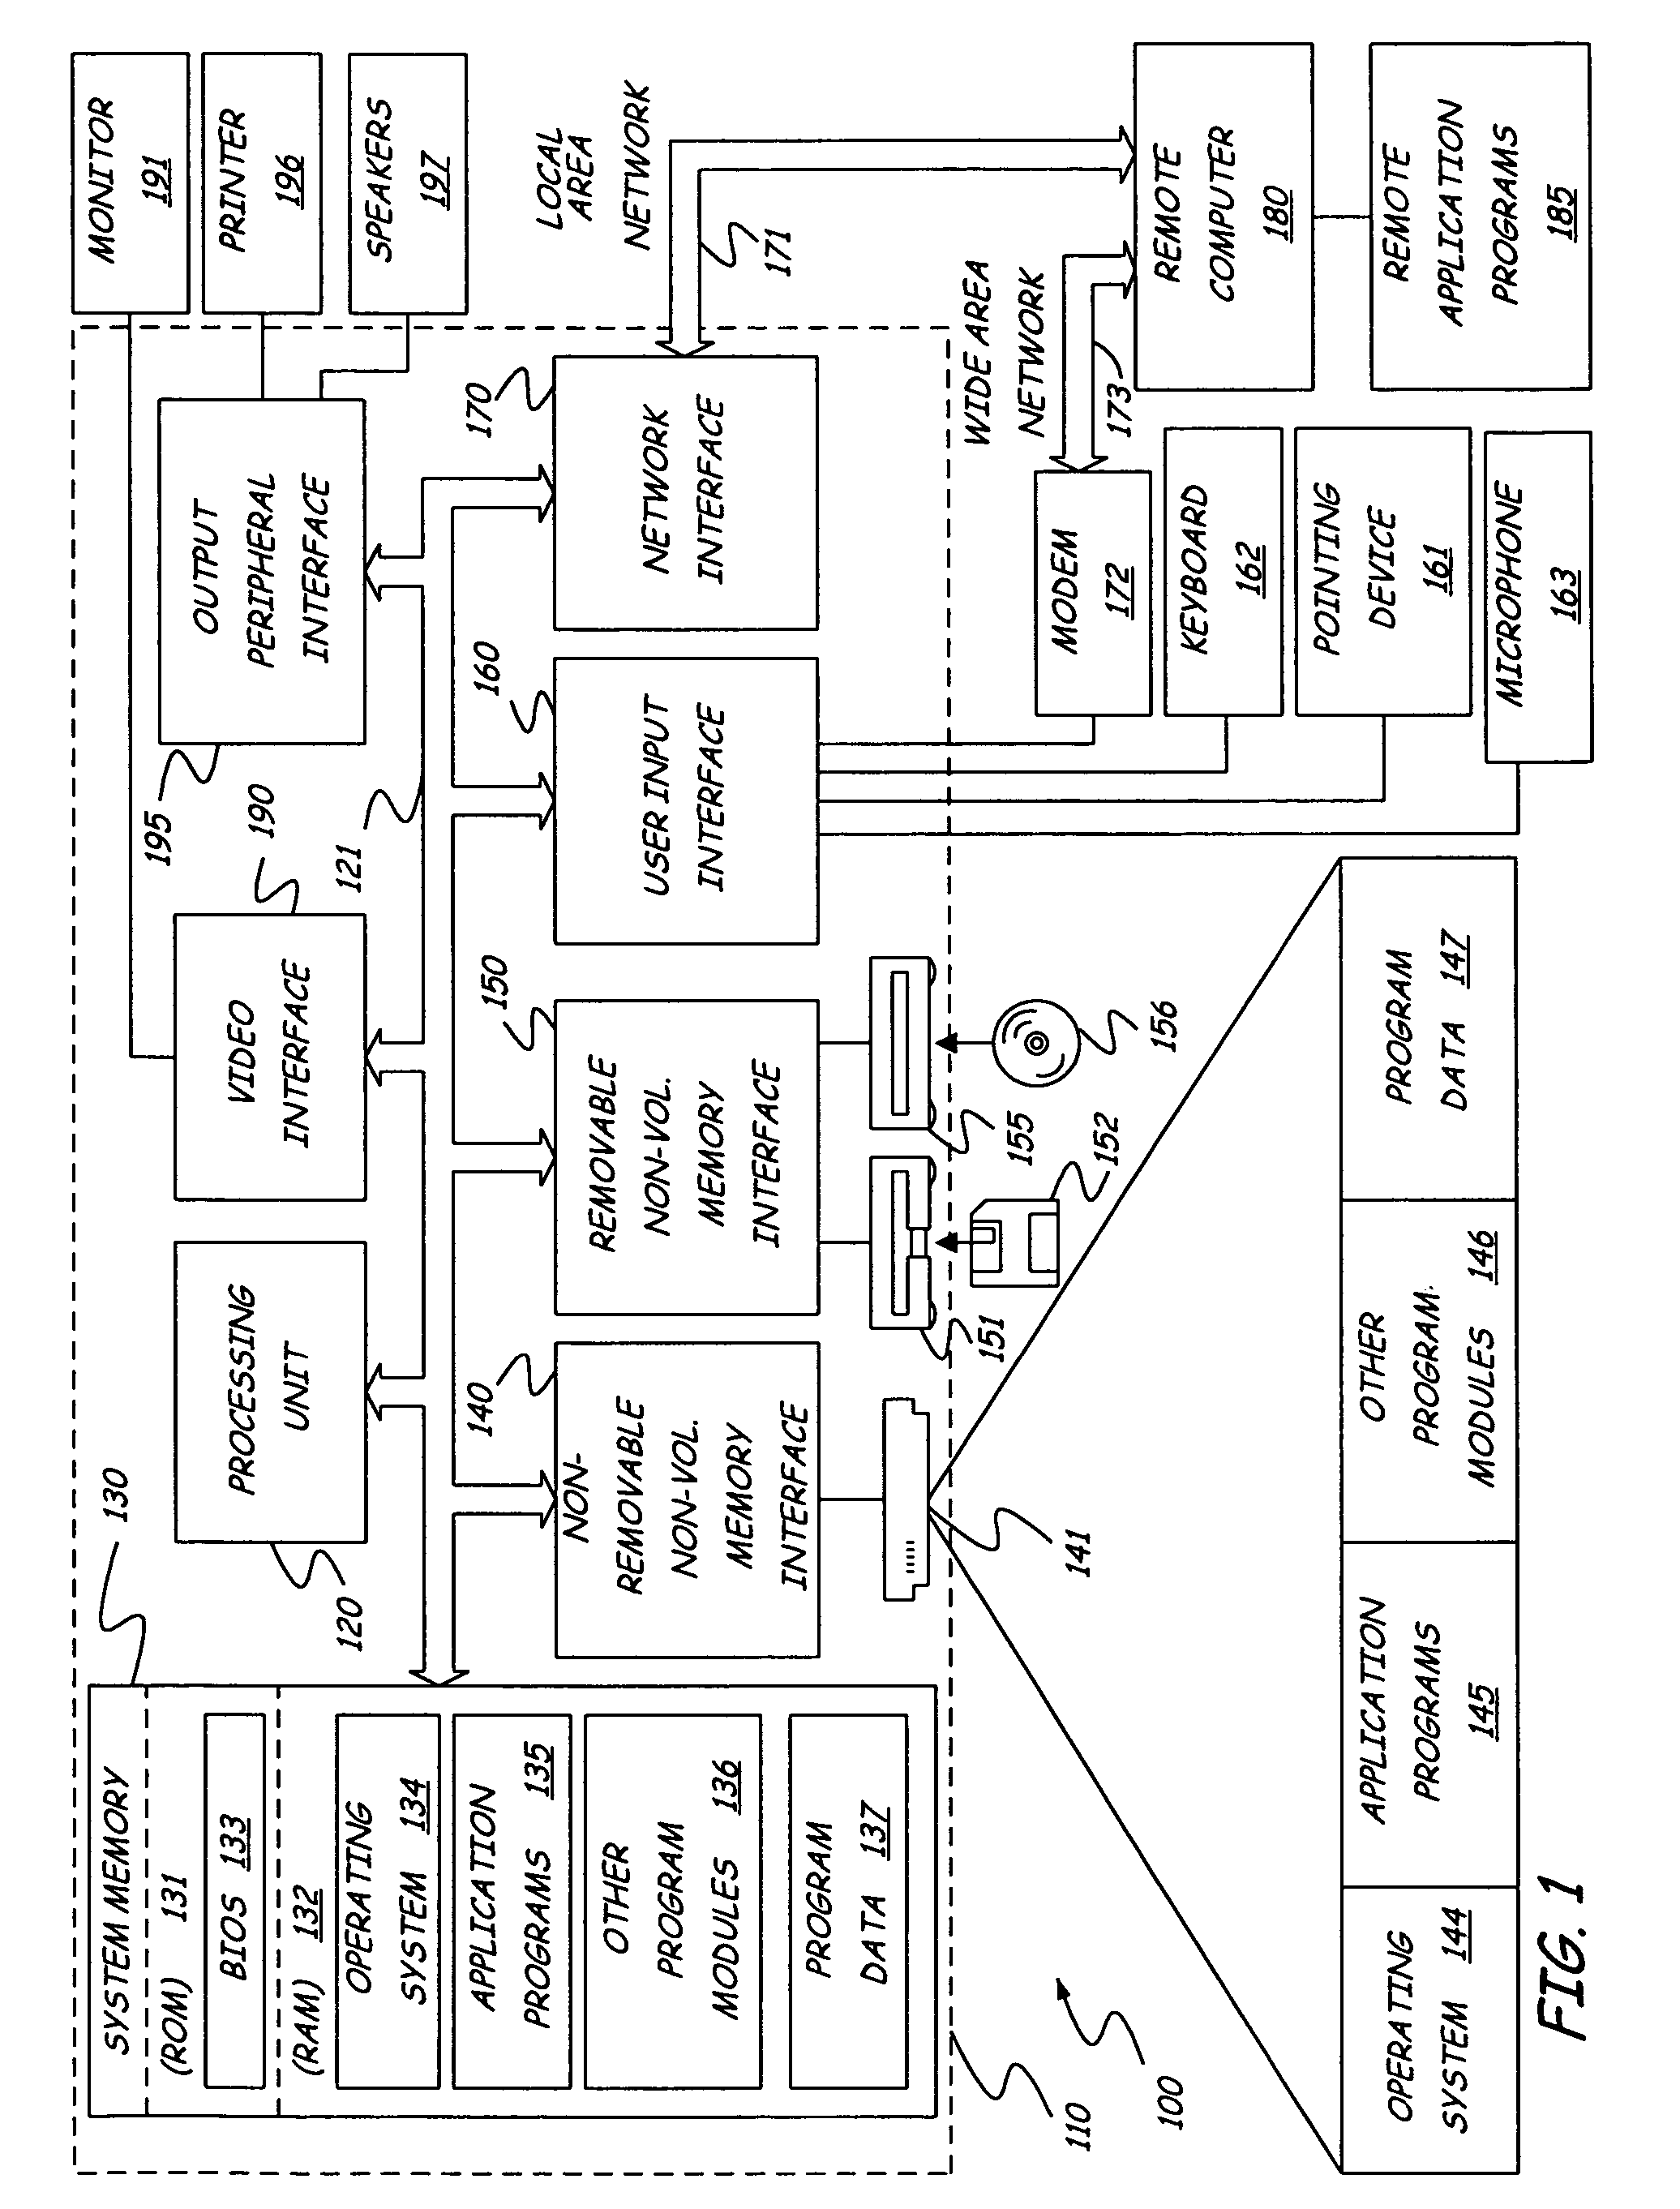 Text mining apparatus and associated methods